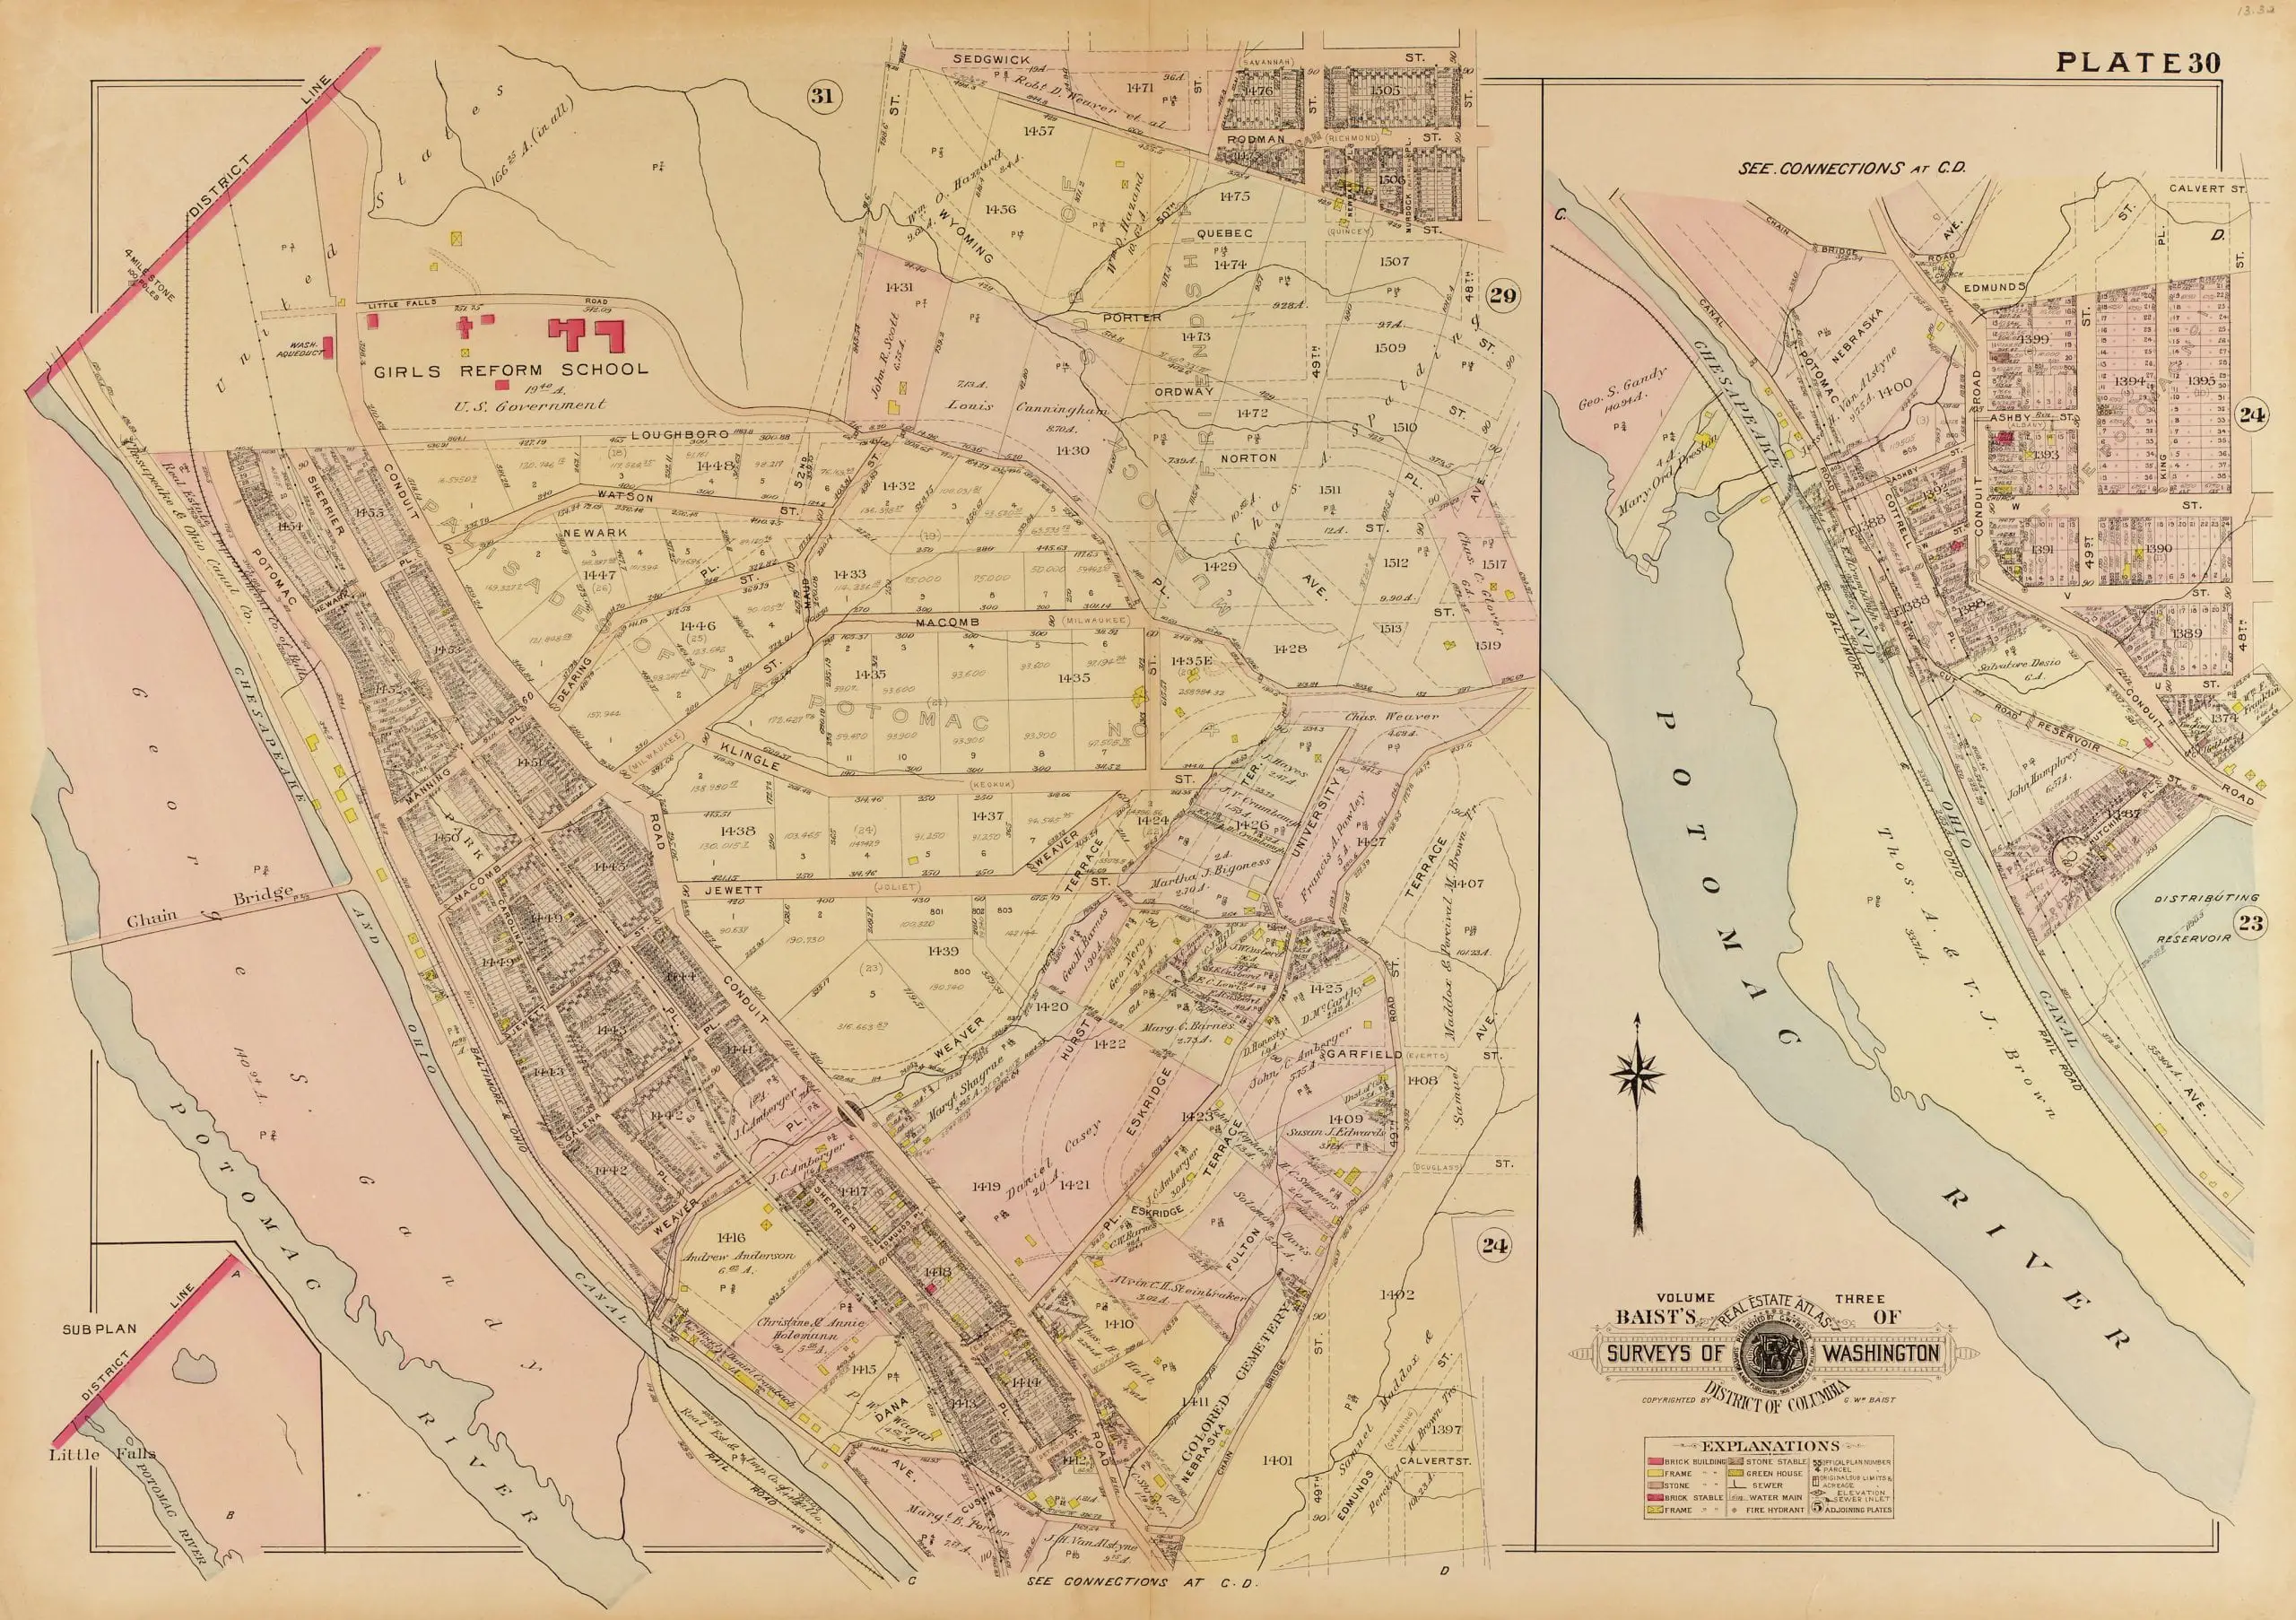 1909 map of the Palisades